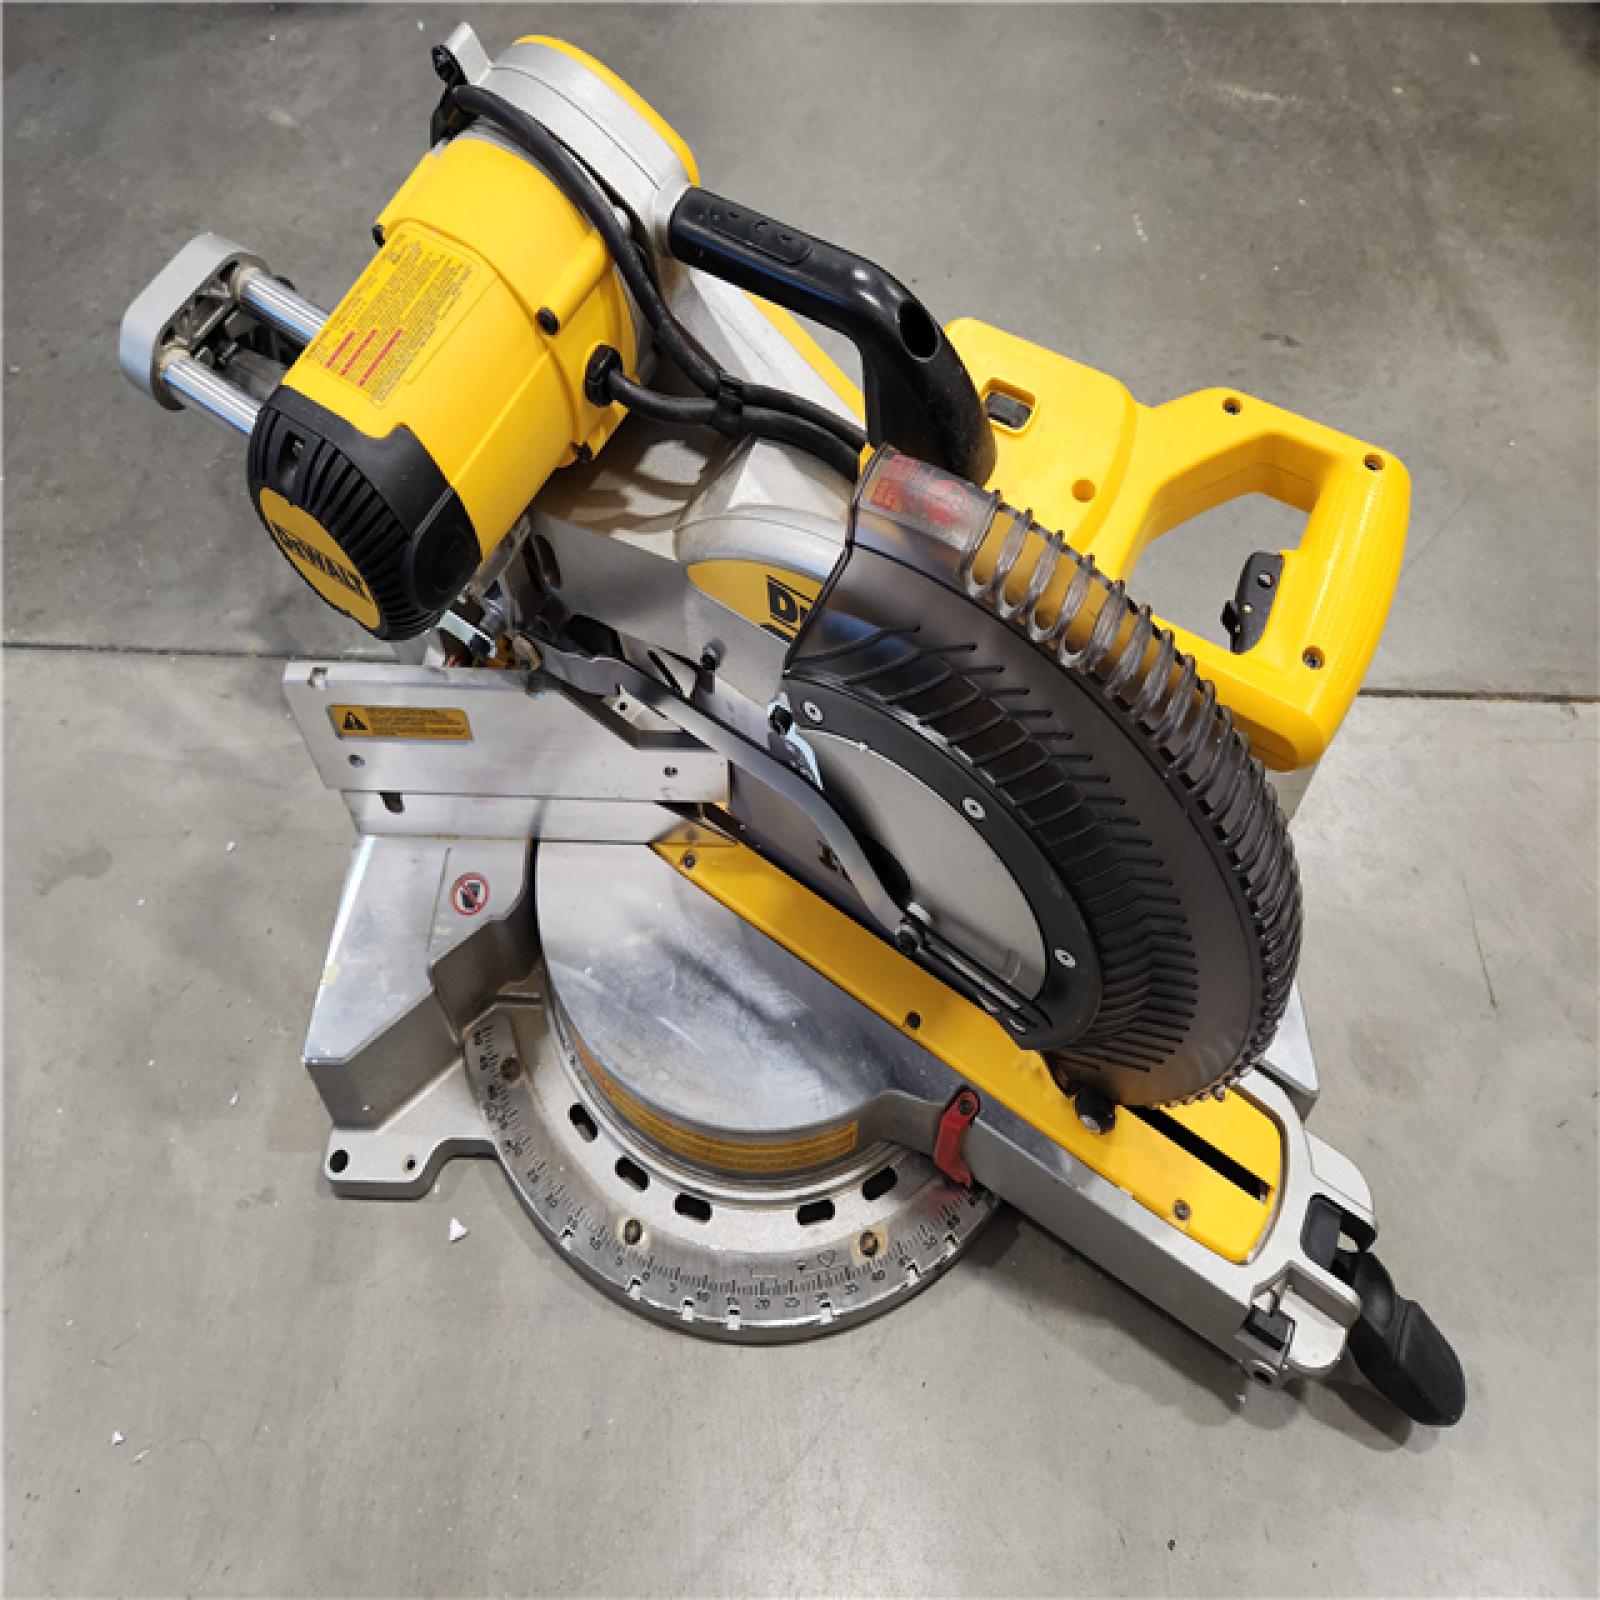 AS-IS DEWALT 15 Amp Corded 12 in. Double Bevel Sliding Compound Miter Saw